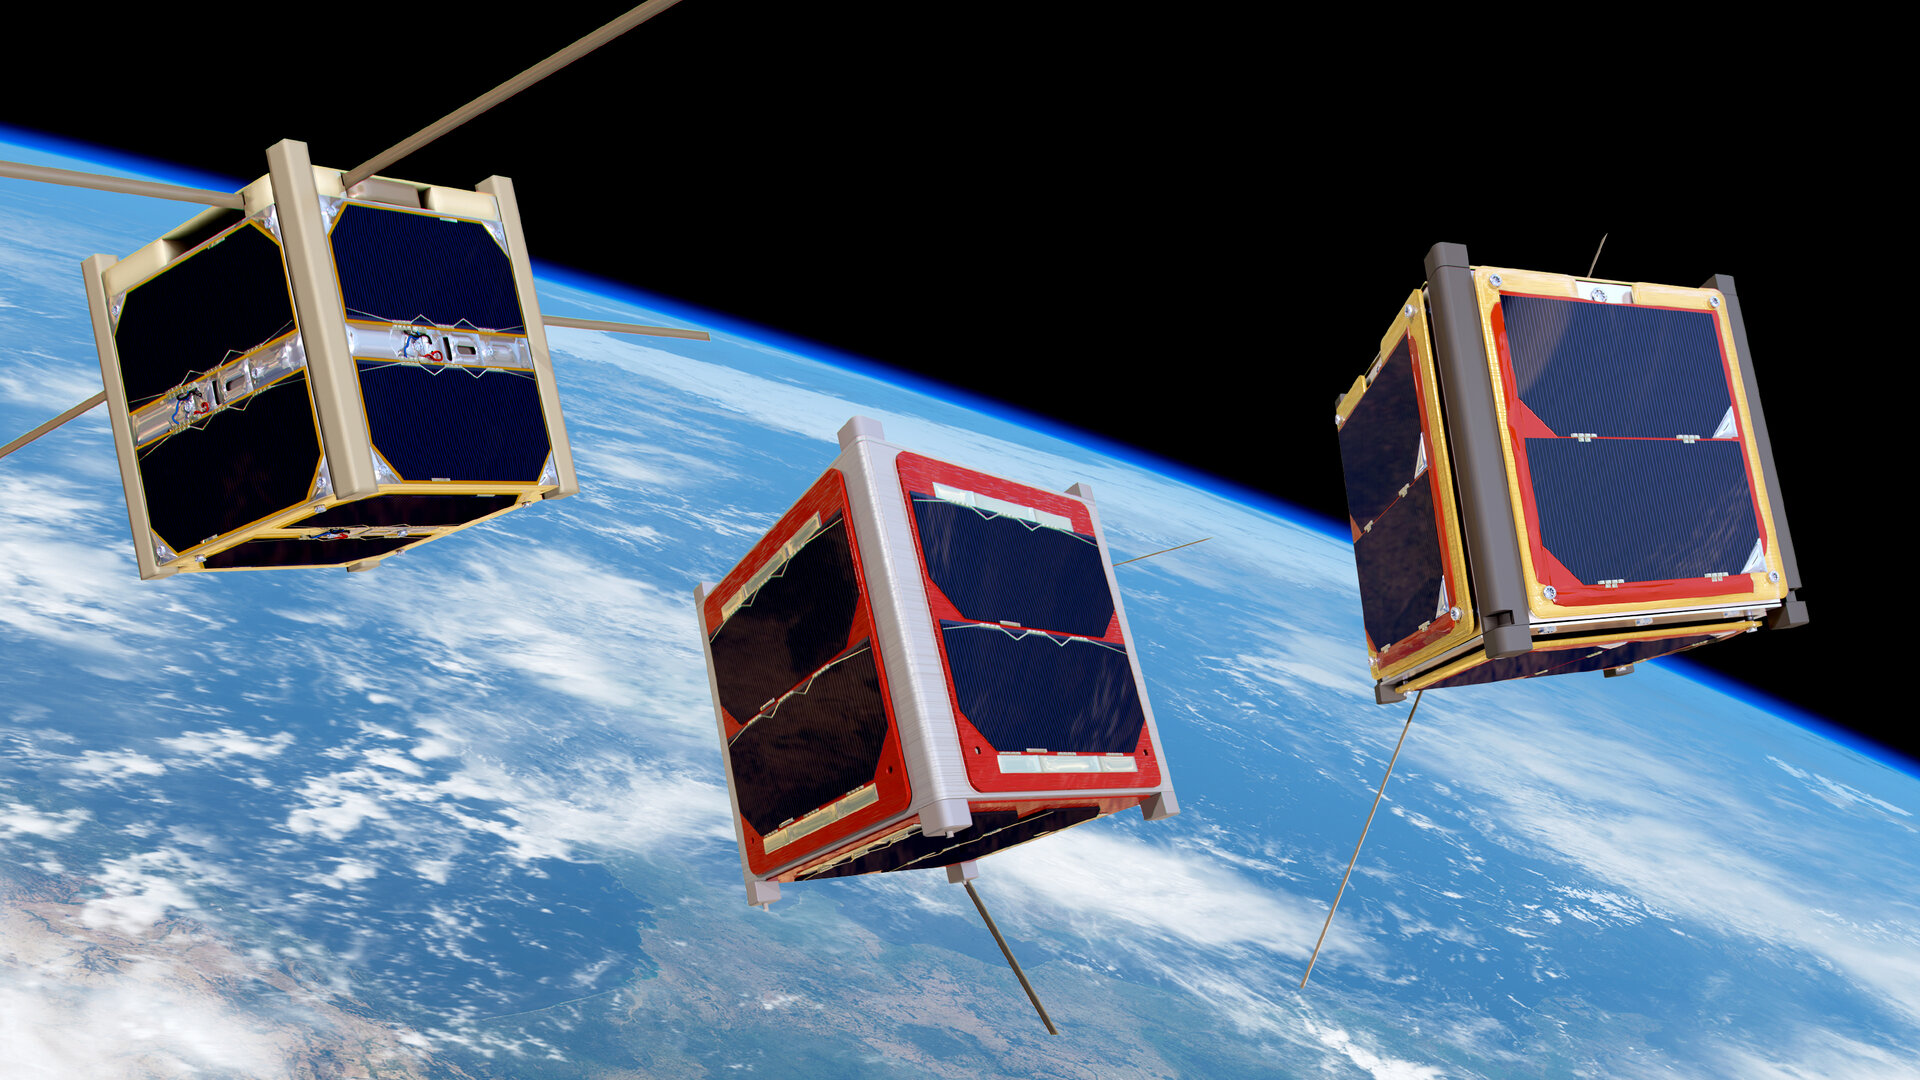 CubeSats in space